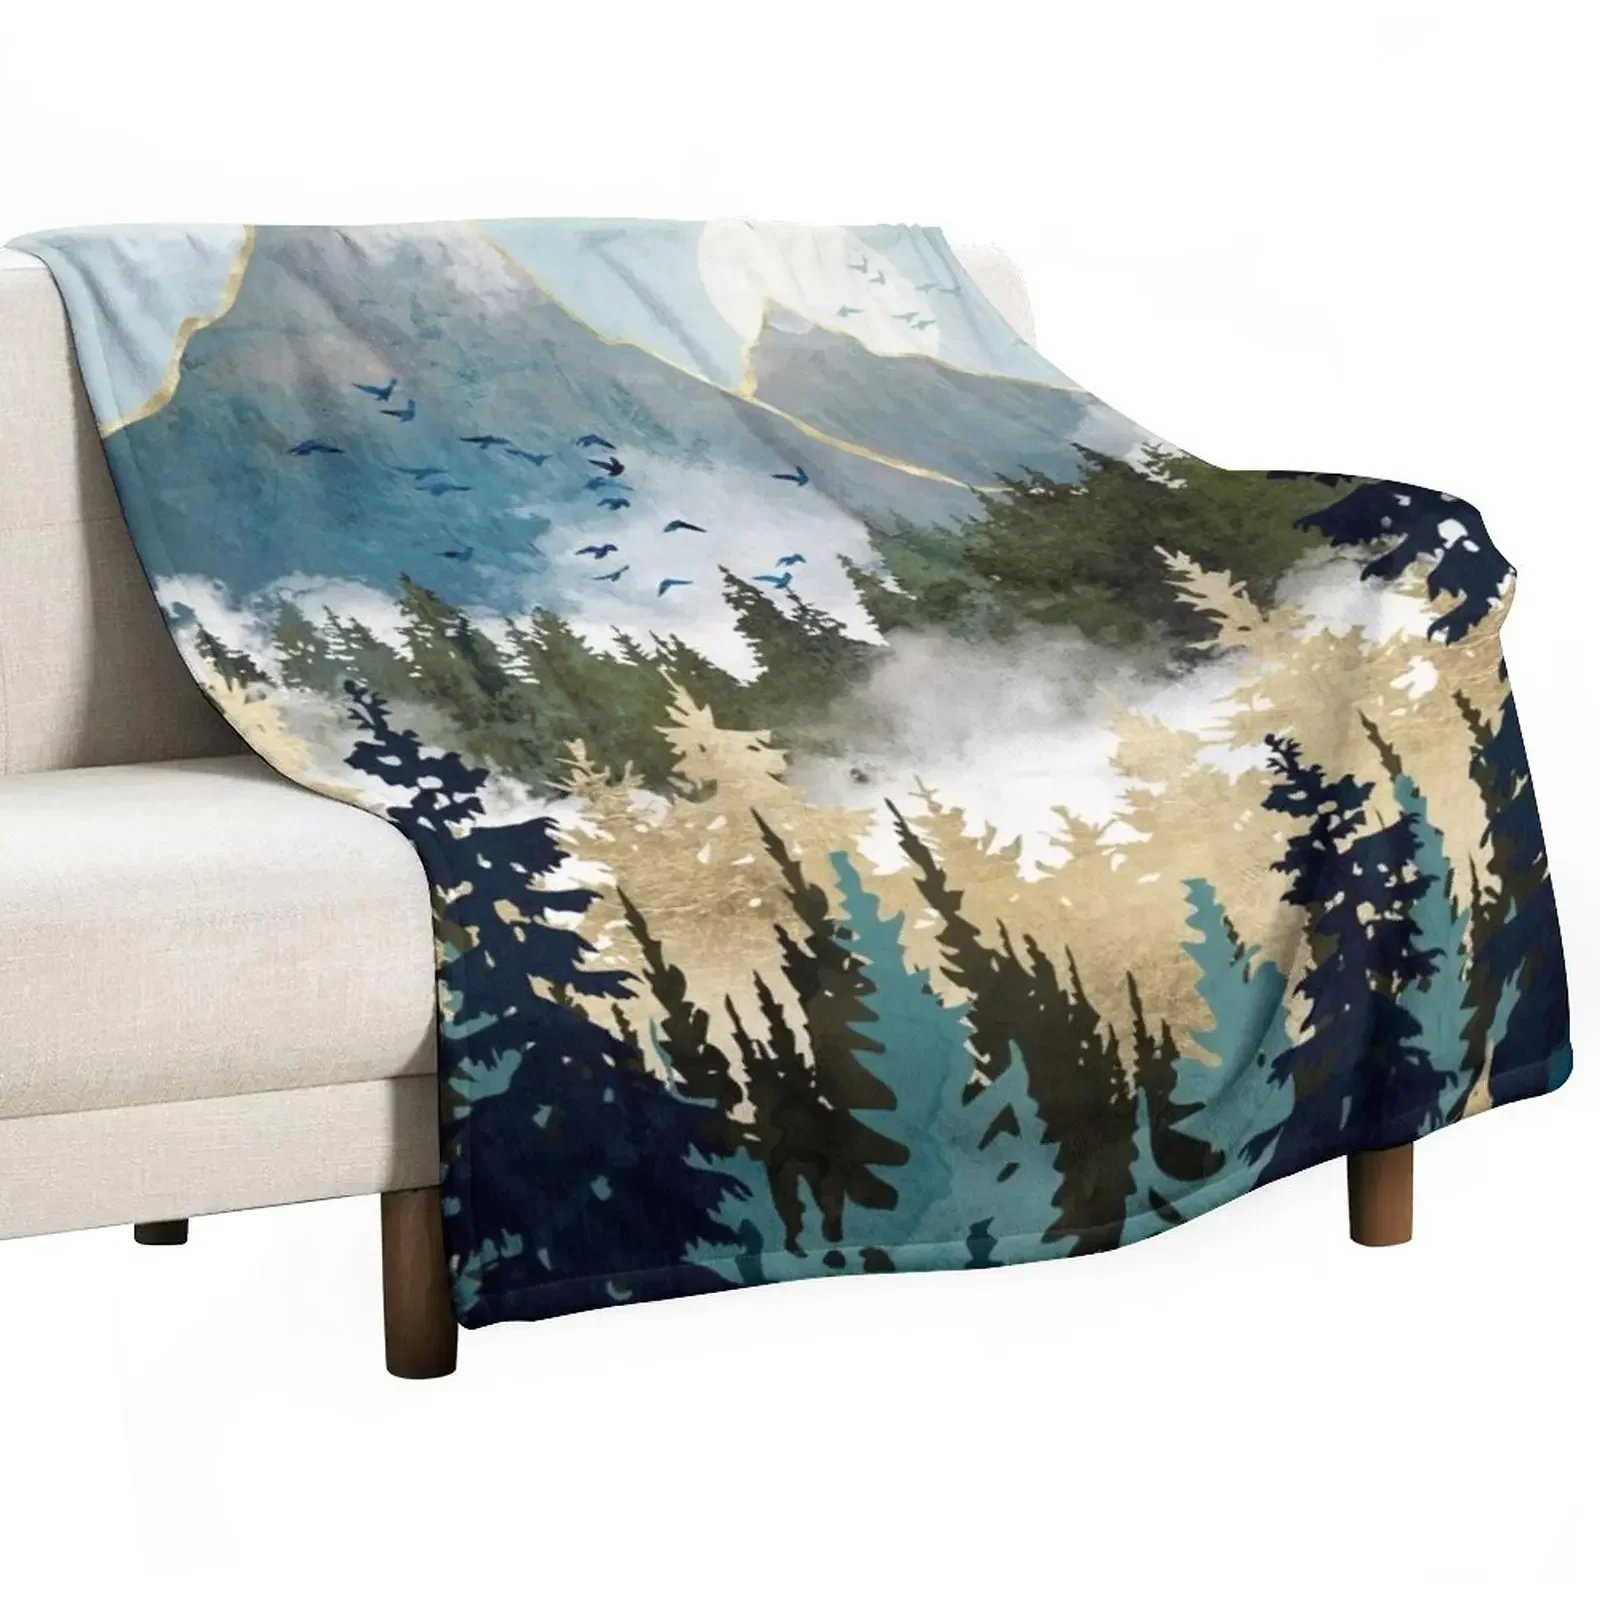 

Misty Pines Throw Blanket Summer Hairy For Sofa Thin Blankets